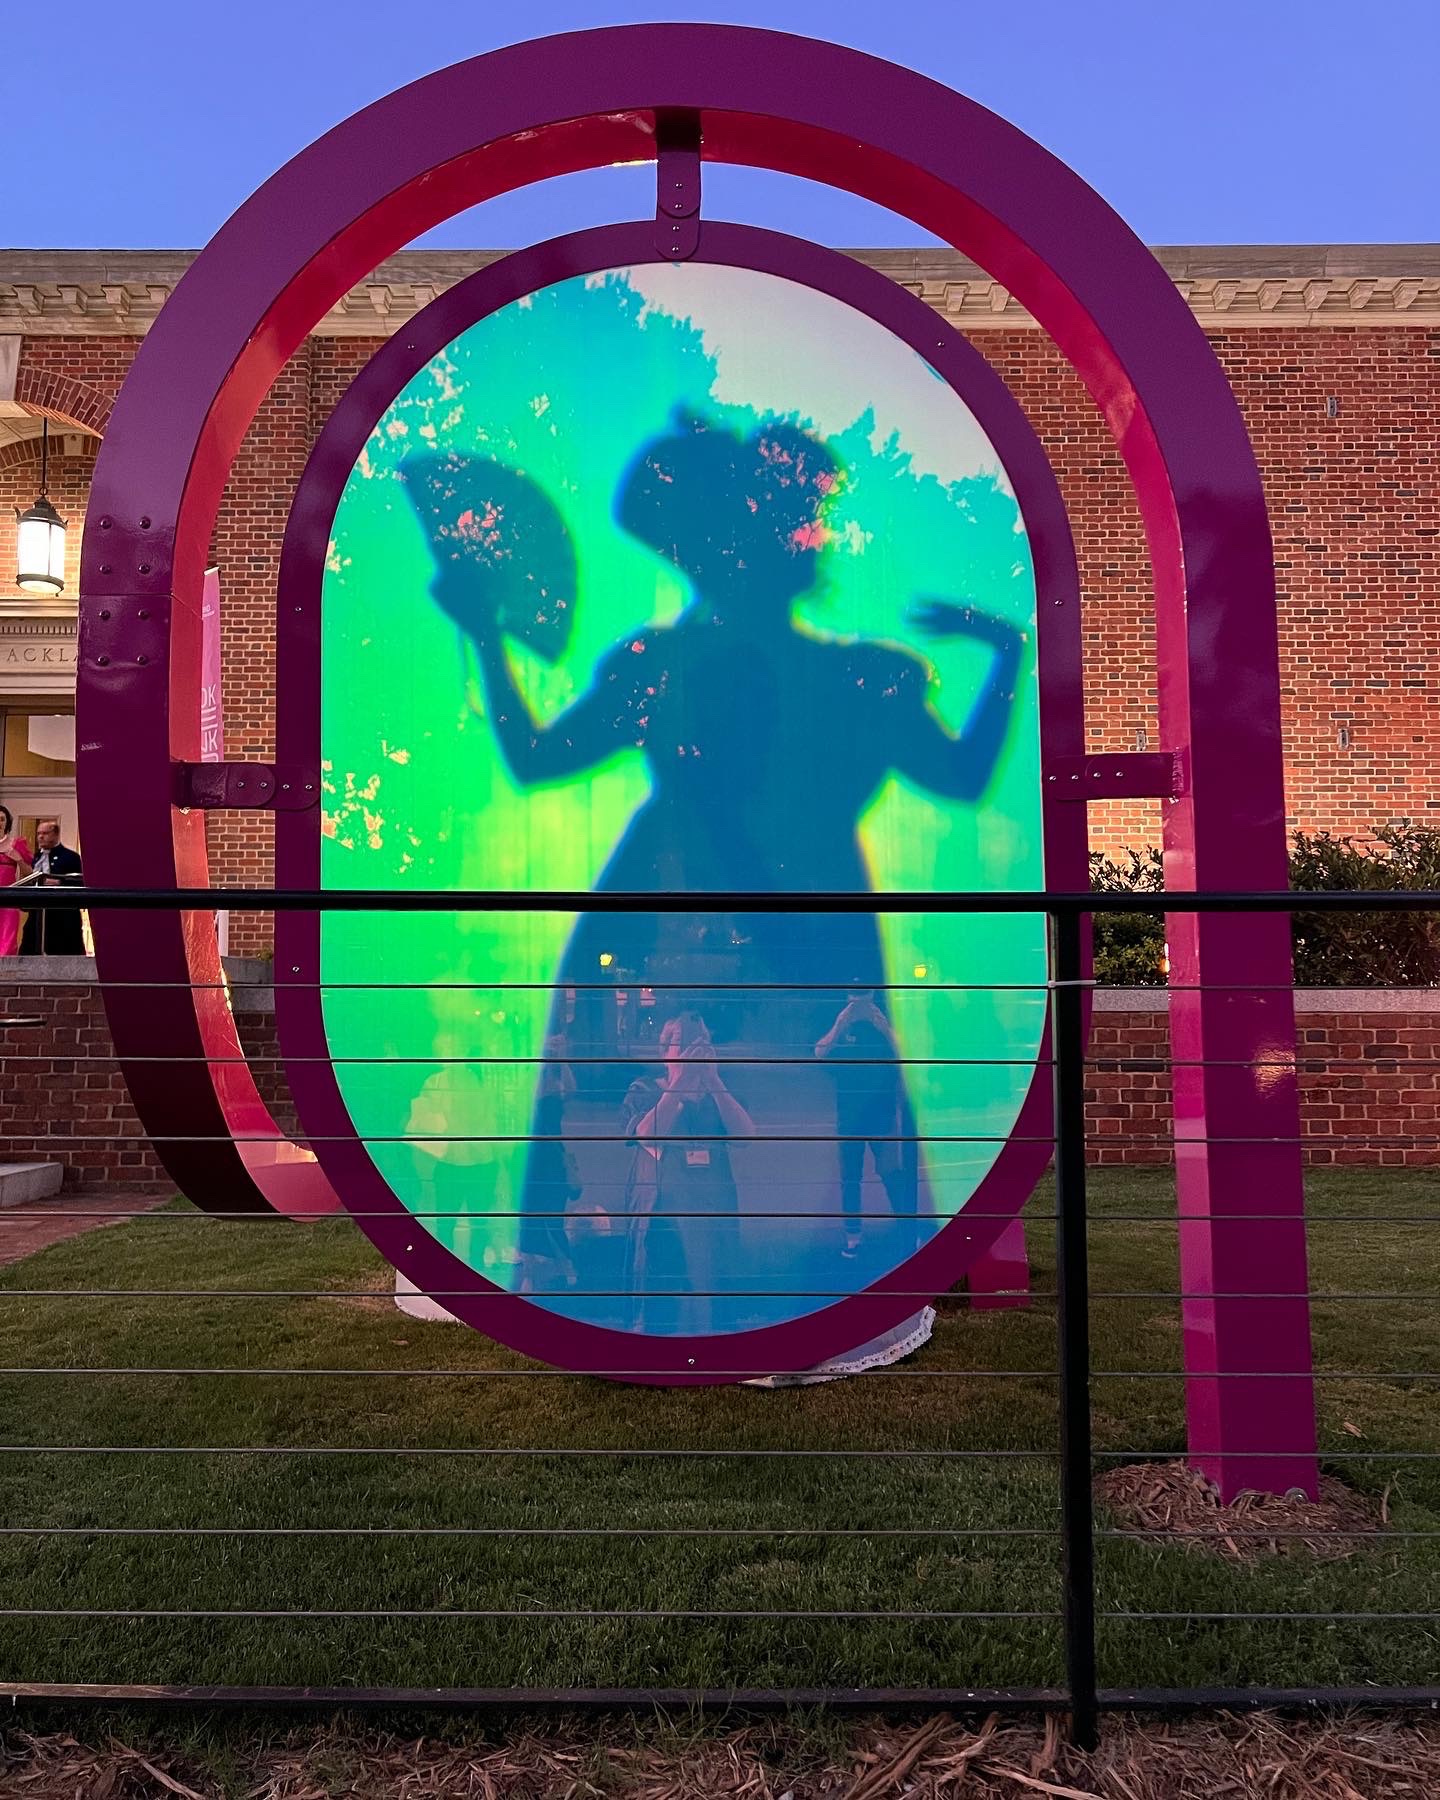 A participant poses behind an art installation outside the Ackland Art Museum during the mystery event.